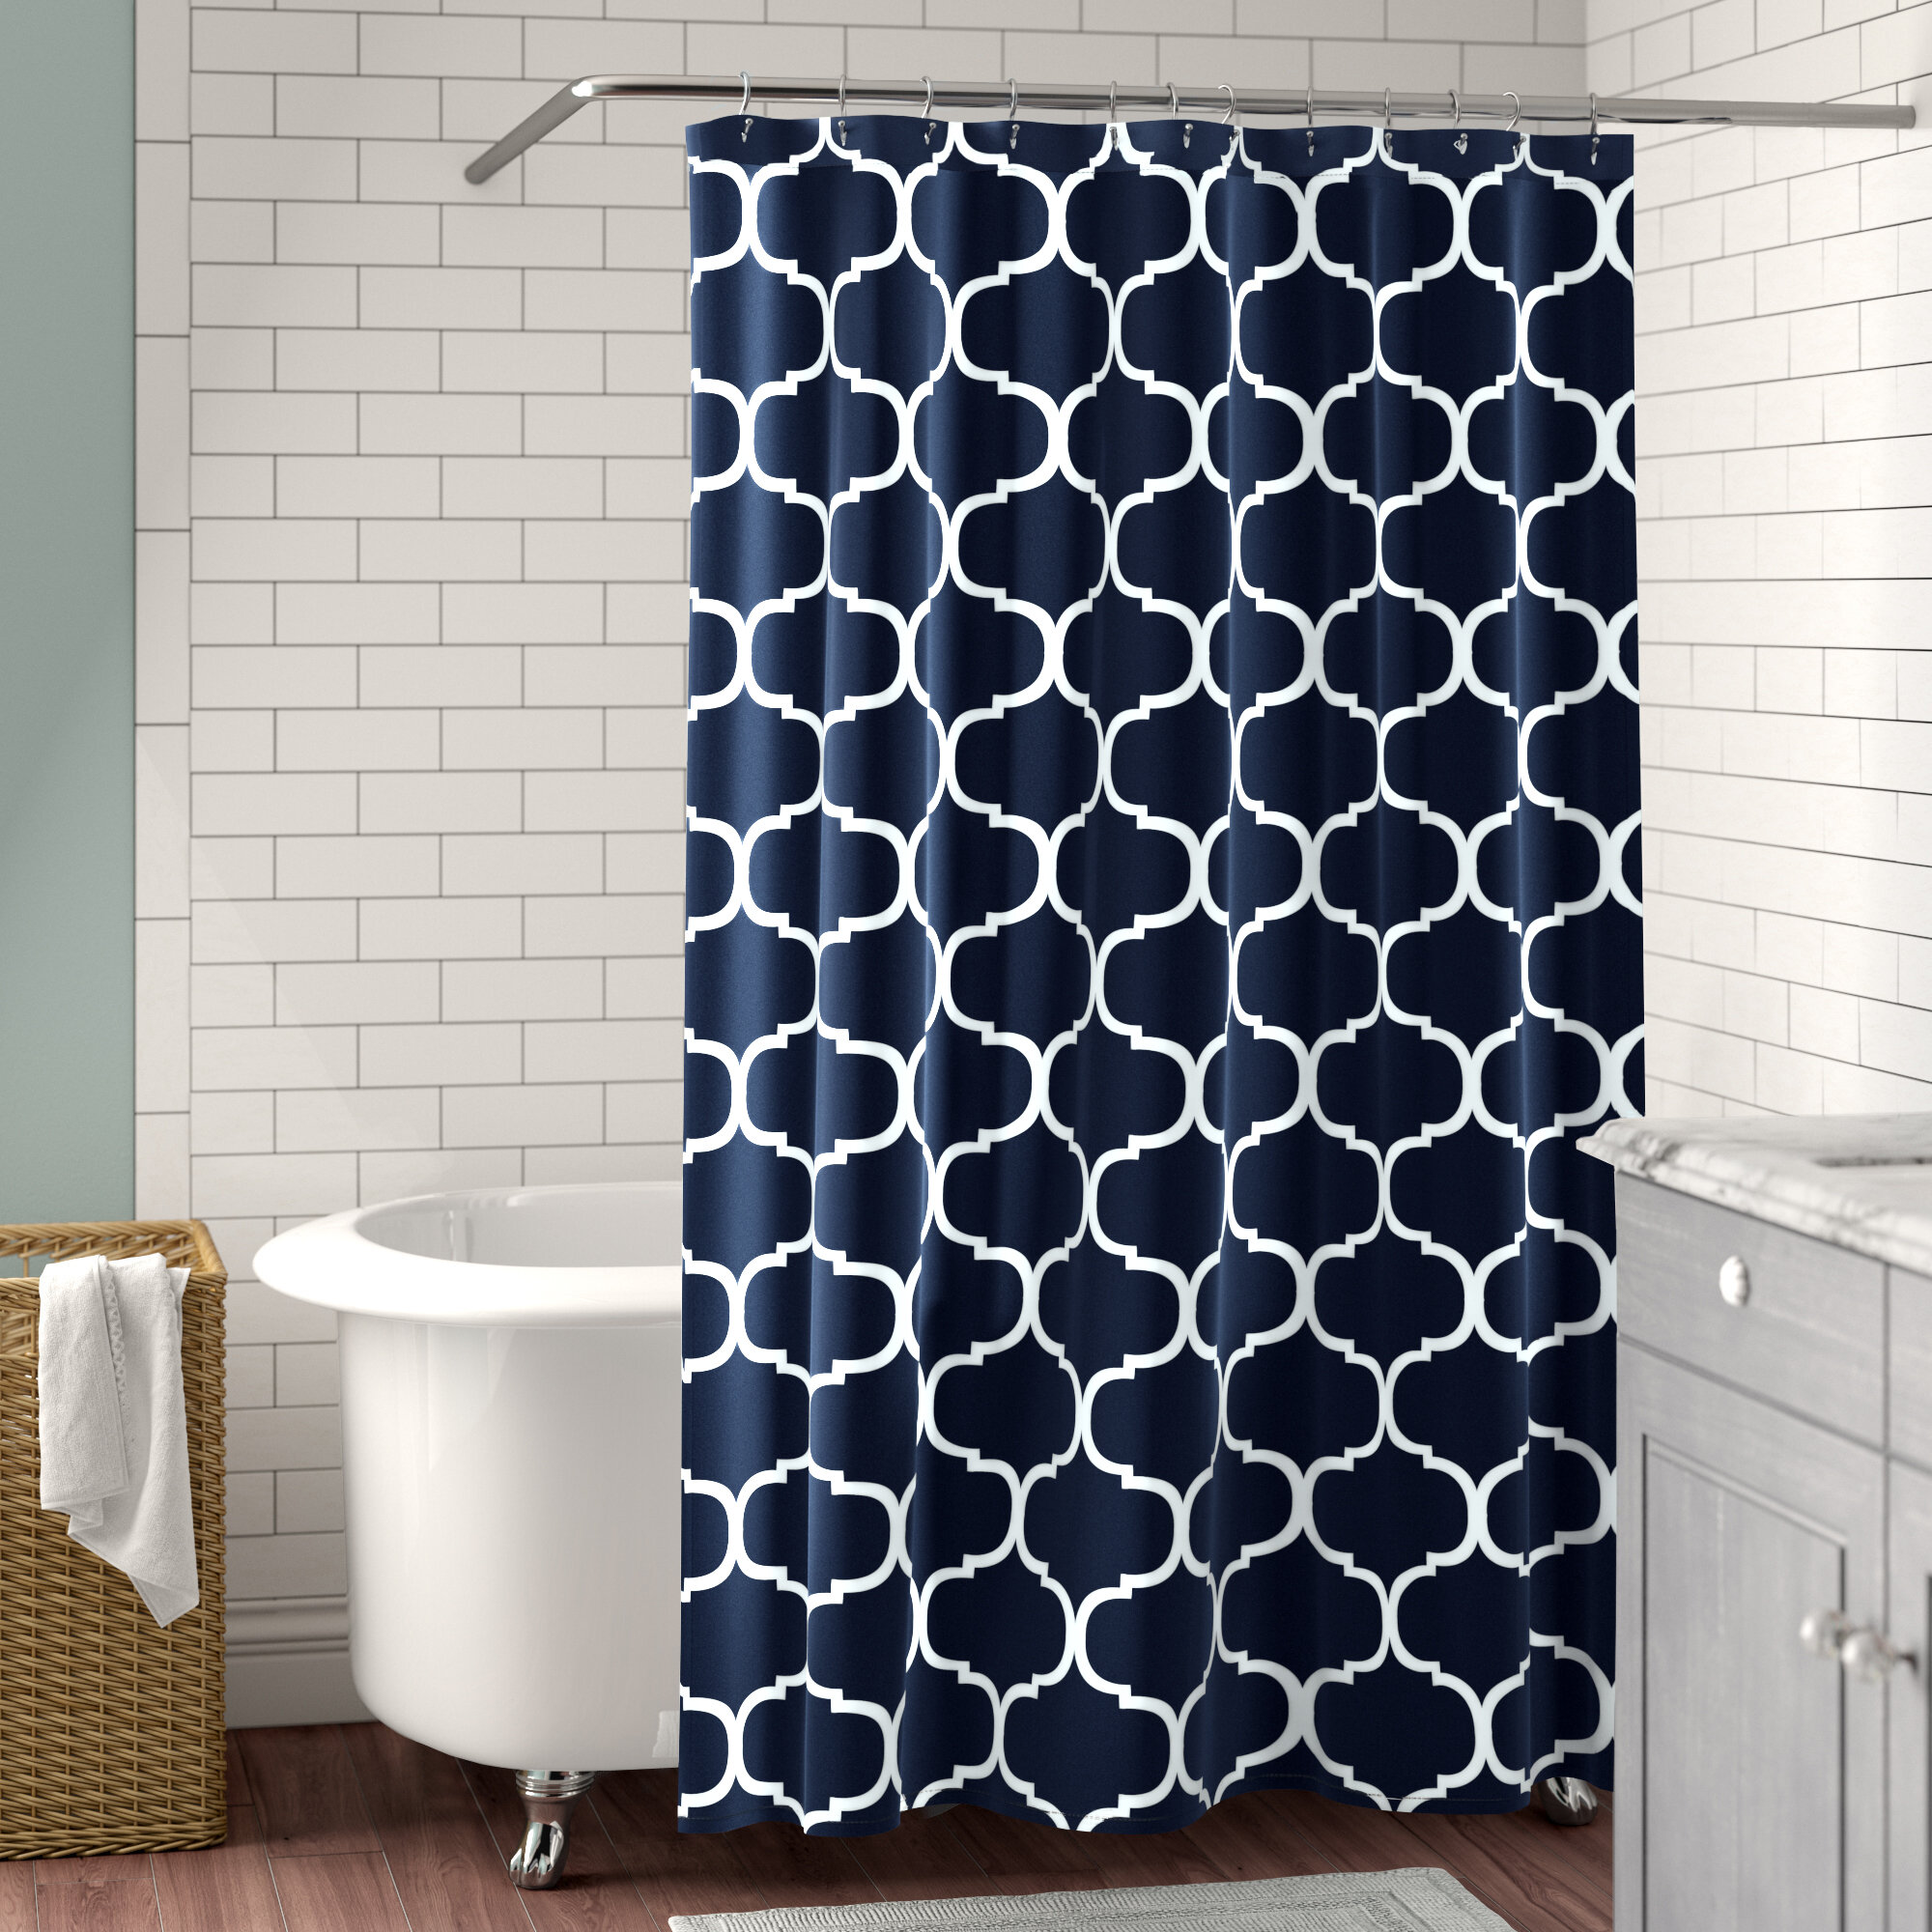 Navy Blue 72x84 Inches Water Repellent Decorative Embossed Pattern CAROMIO Soft Microfiber Fabric Shower Curtain or Liner for Bathroom